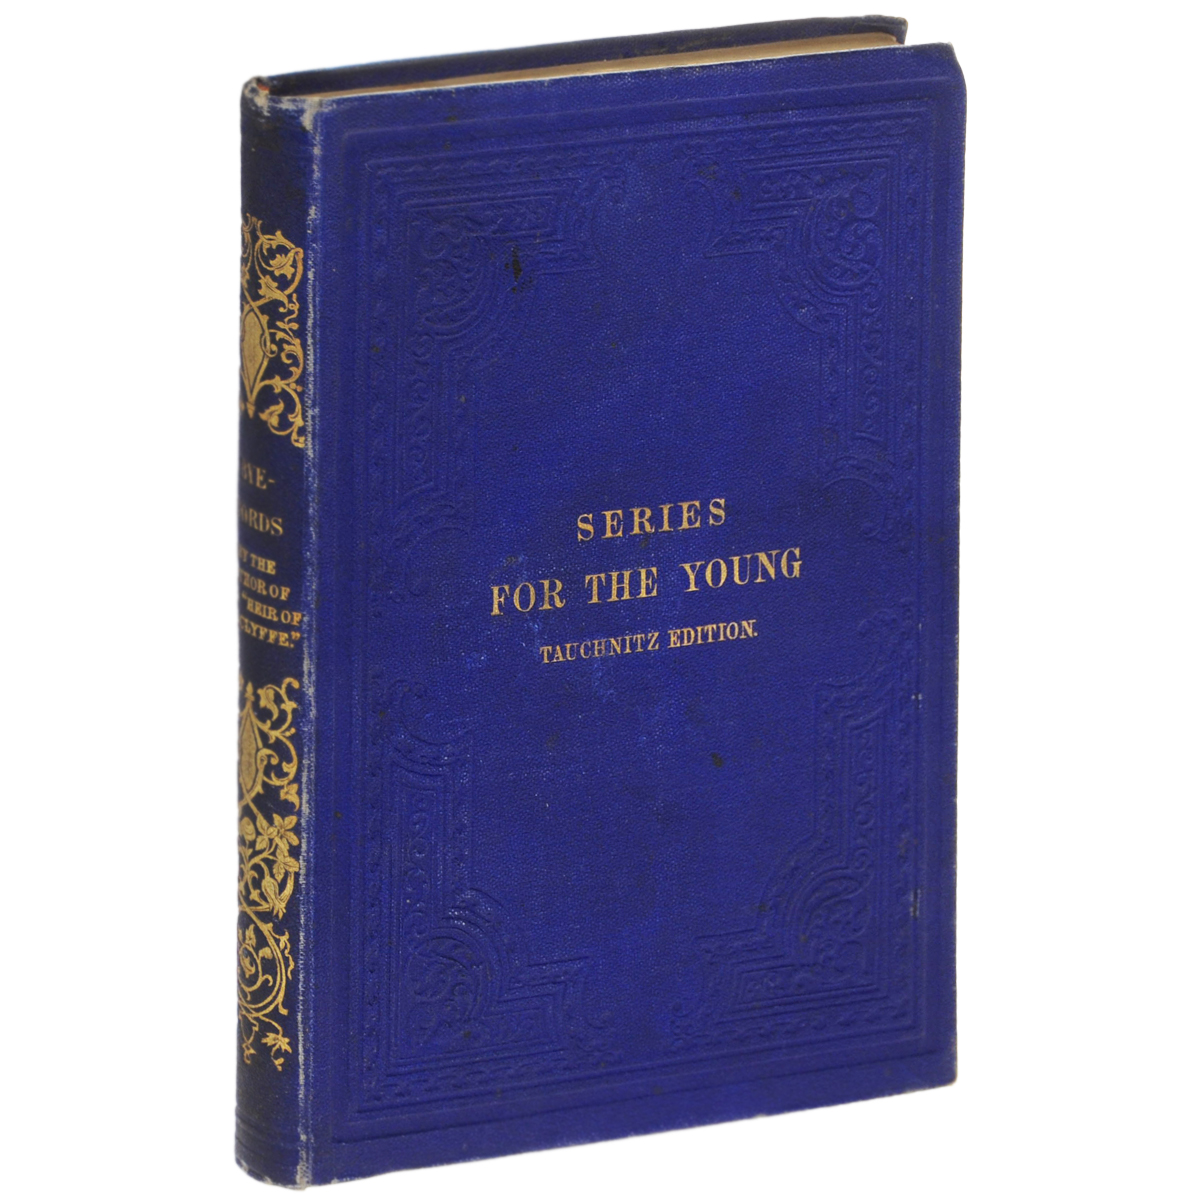 Series for the Young - C. M. Yonge. 1880 .  .  .     .        .    .     SERIES FOR THE YOUNG TAUCHNITZ EDITION.        .